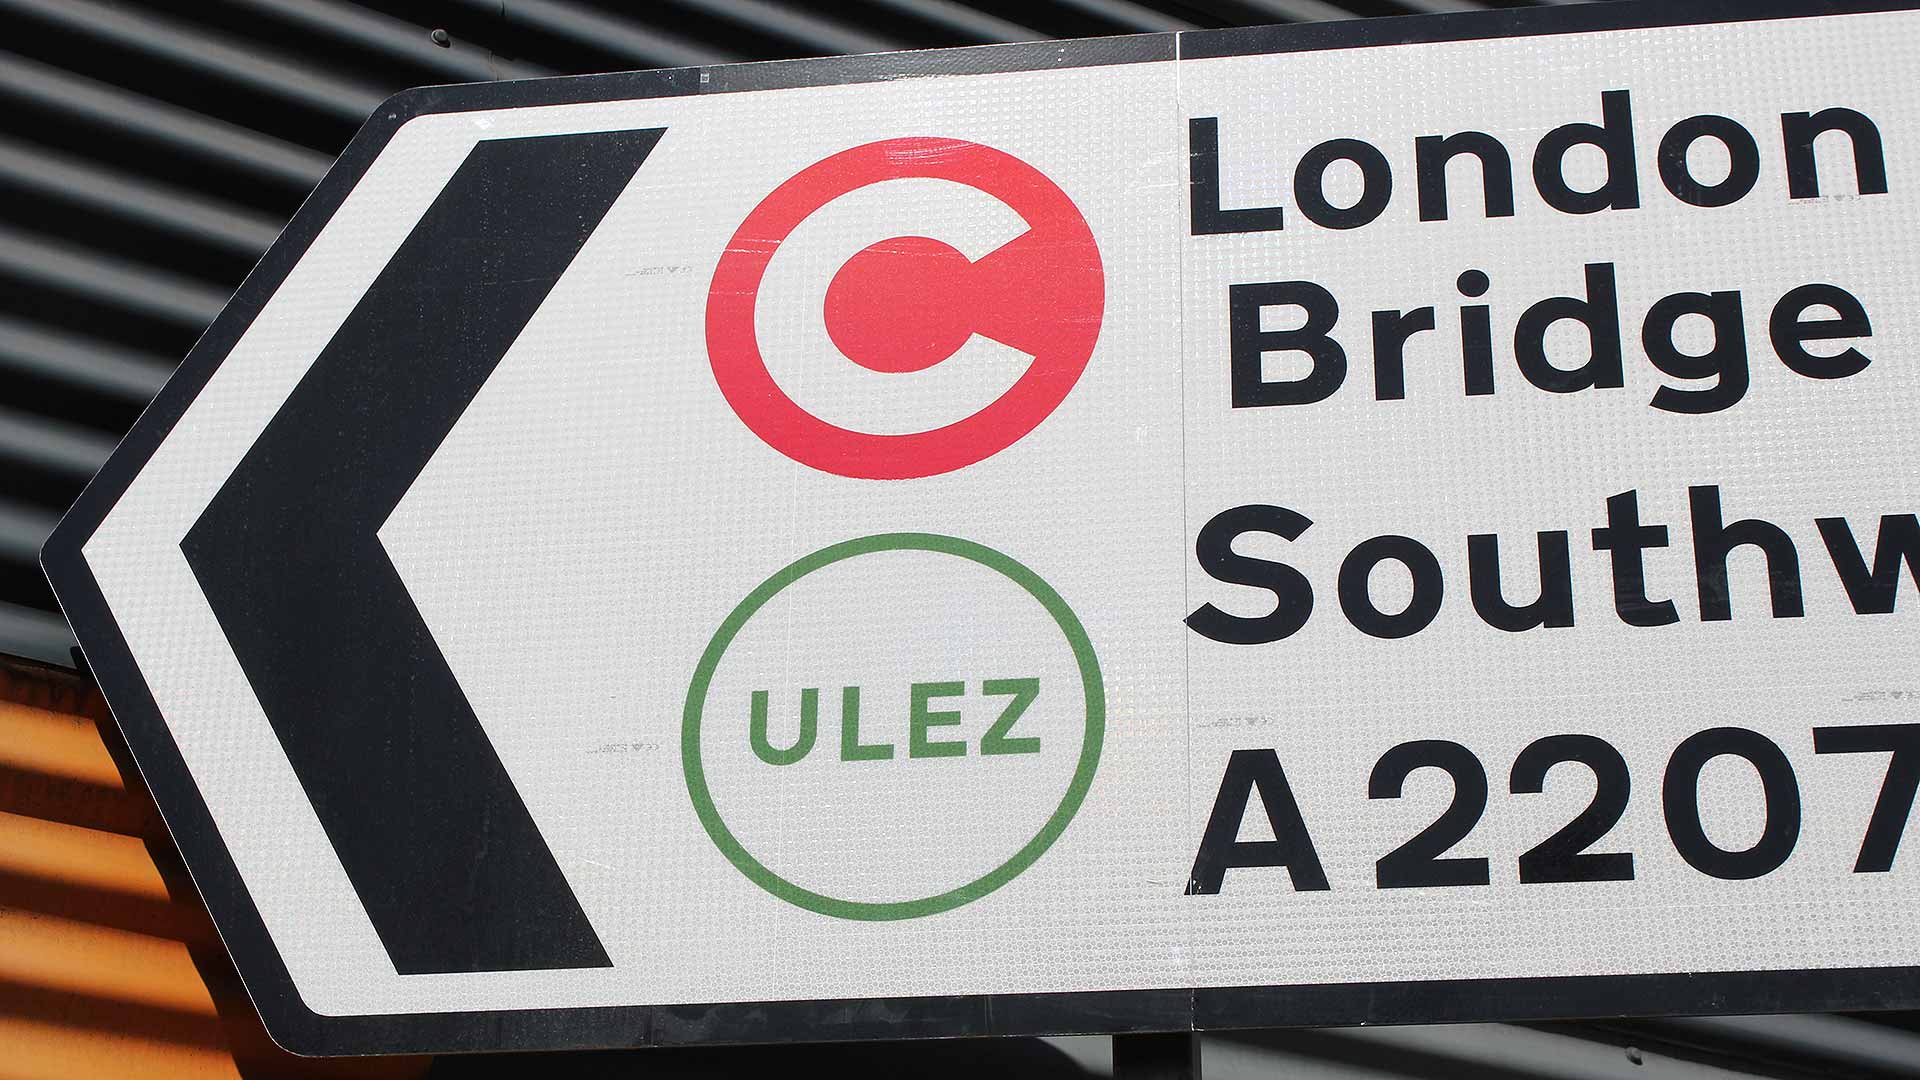 London Congestion Charg and ULEZ road sign